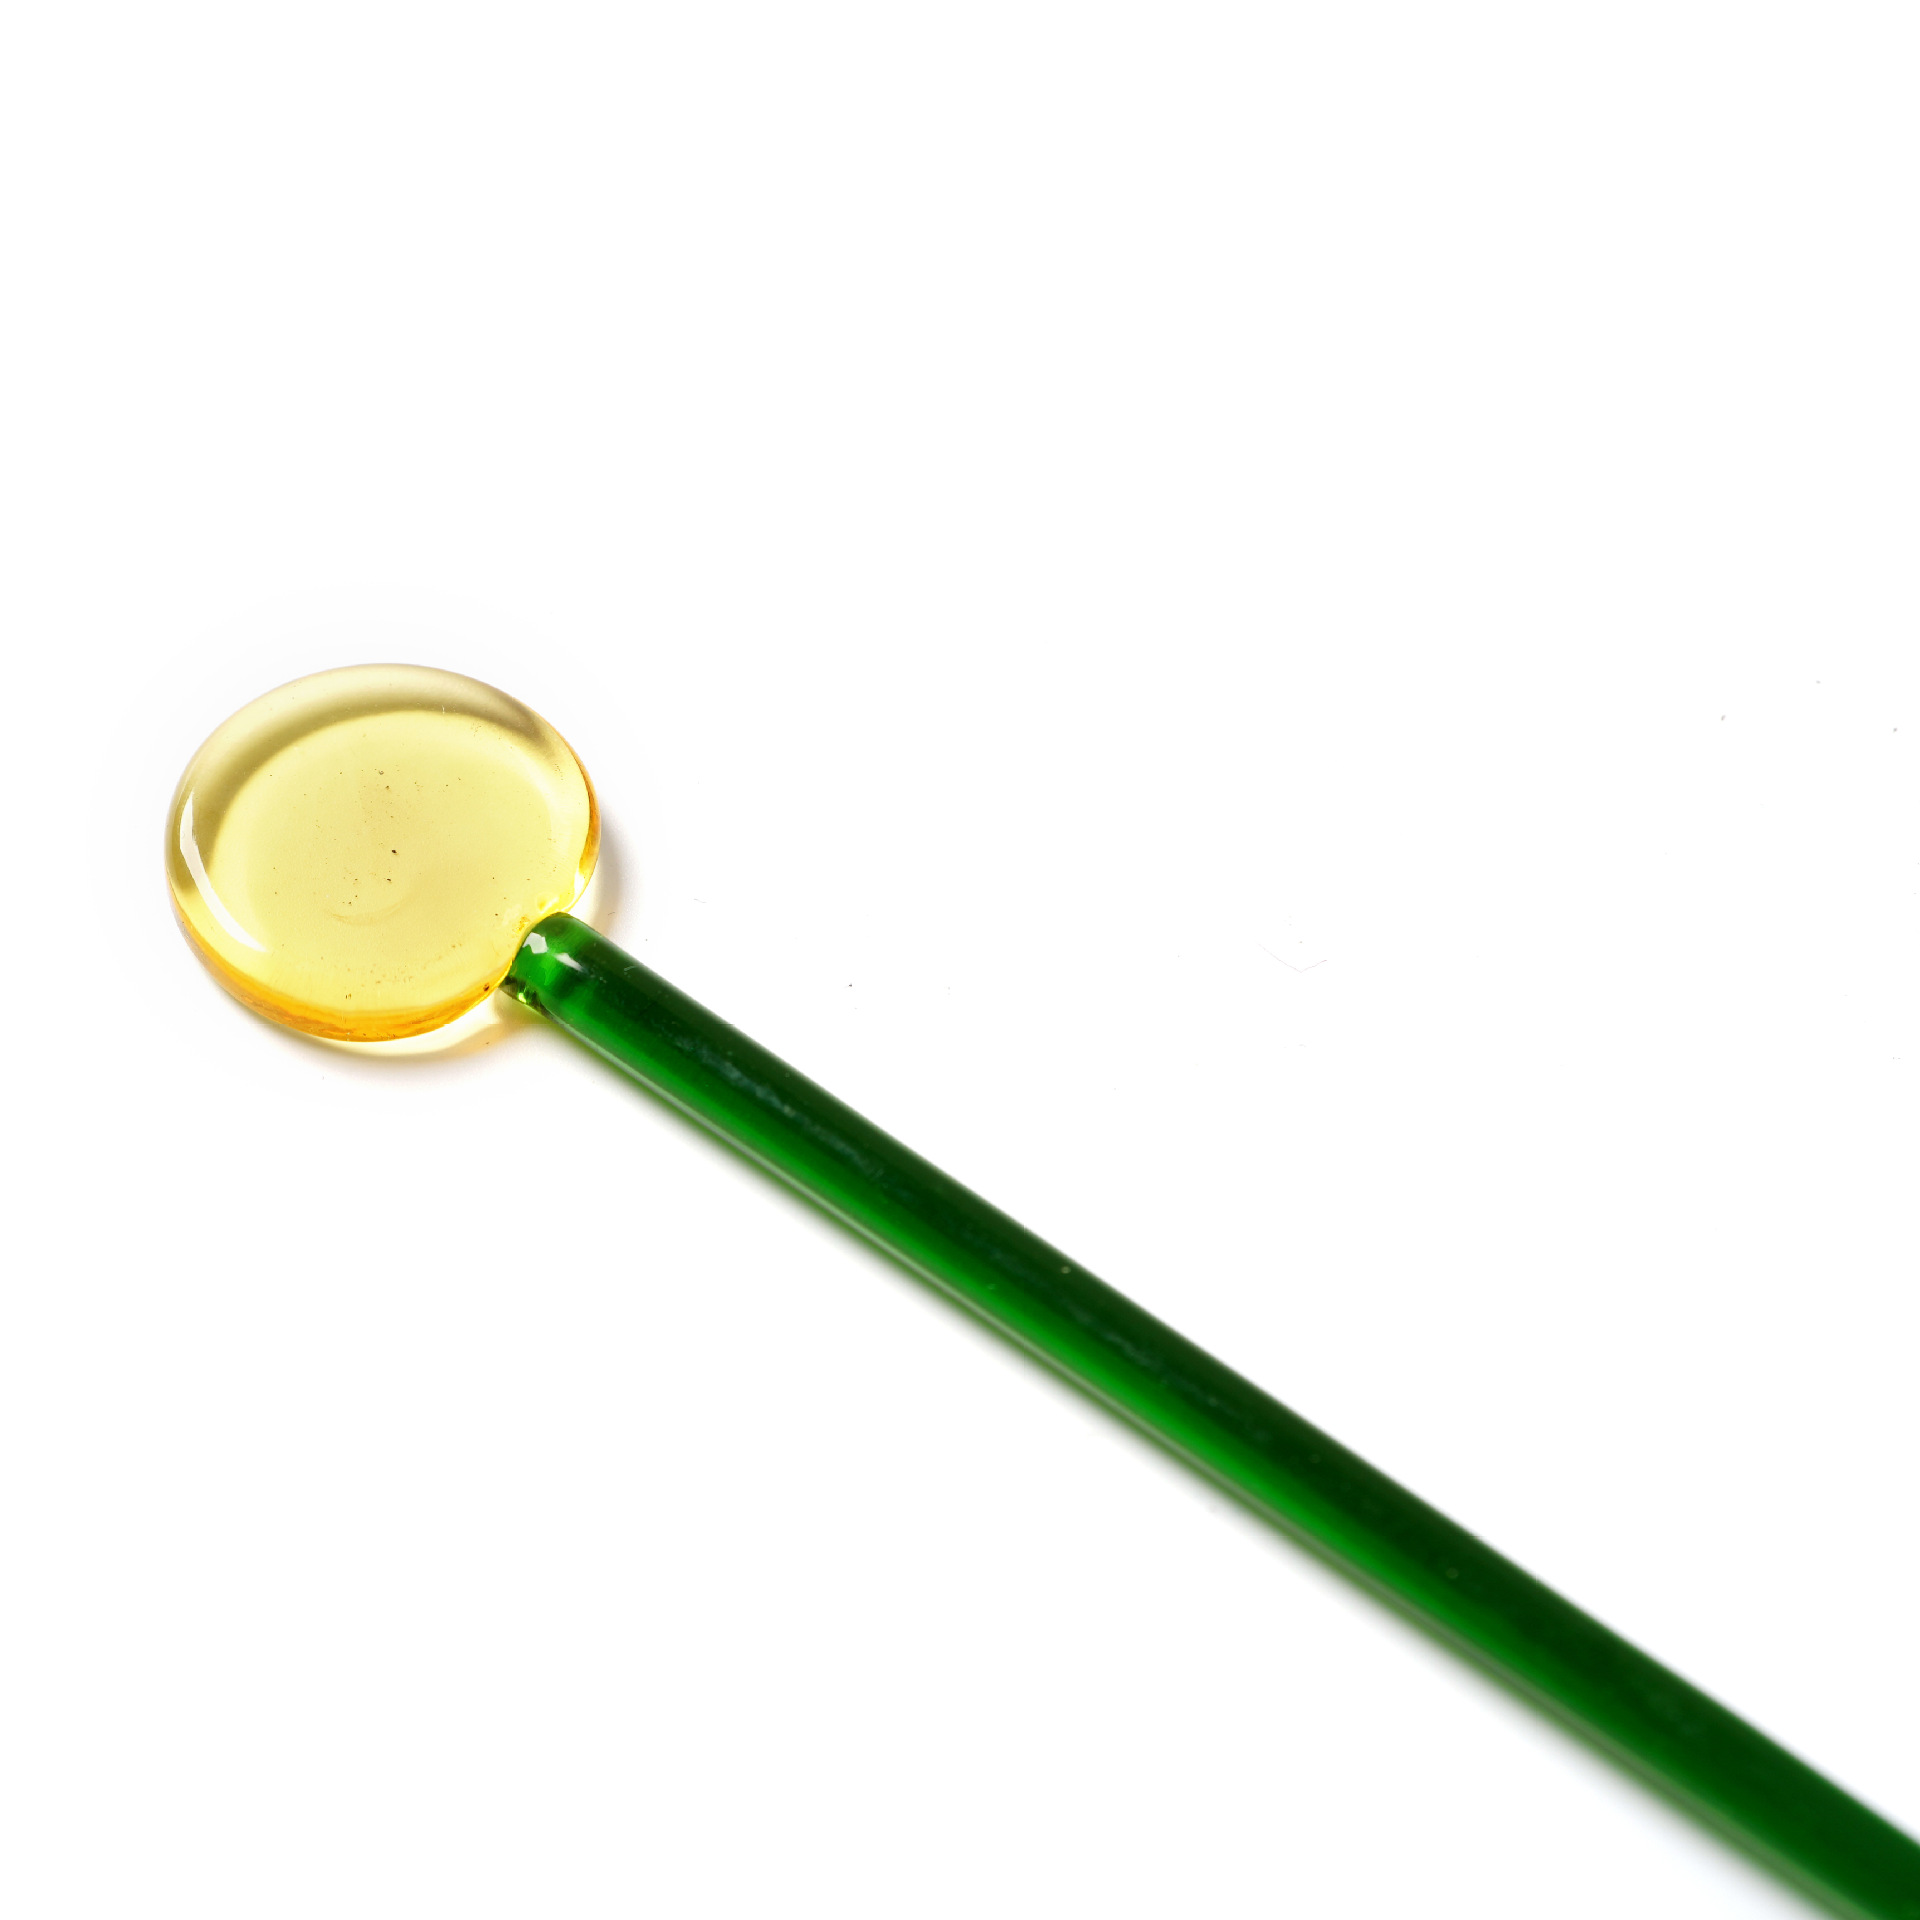 Lollipop cocktail stirring rod yellow and green